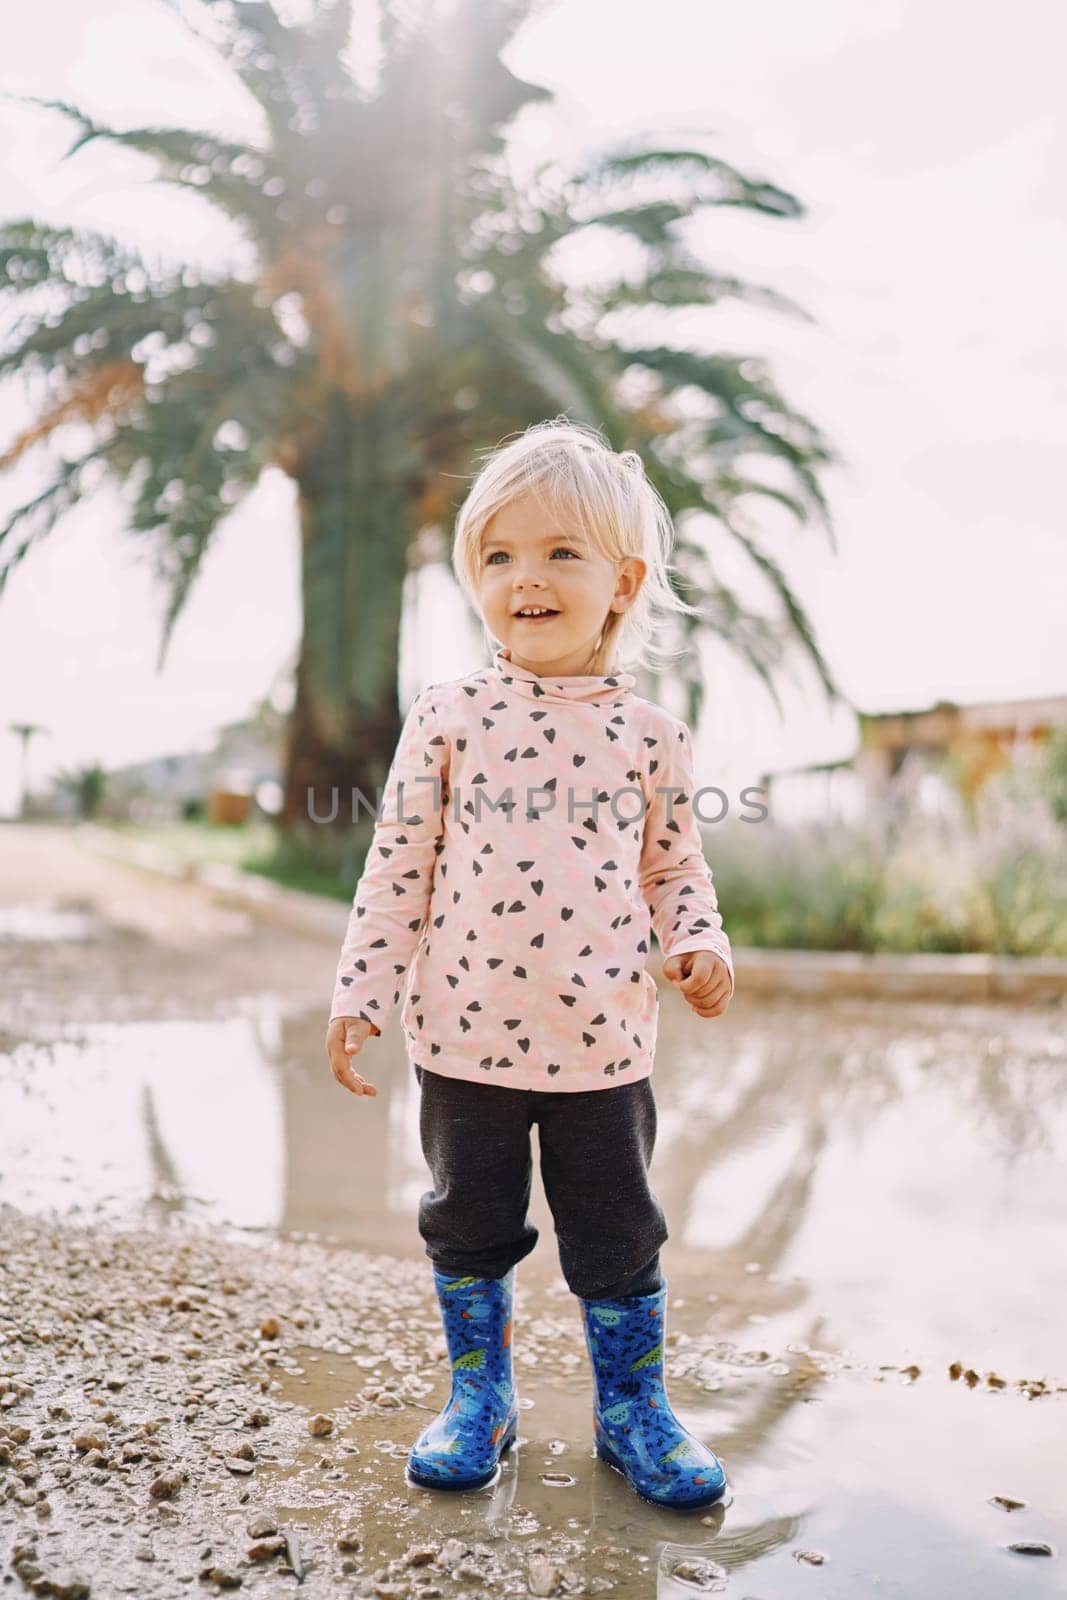 Smiling little girl in rubber boots stands in a puddle against the background of a green palm tree. High quality photo